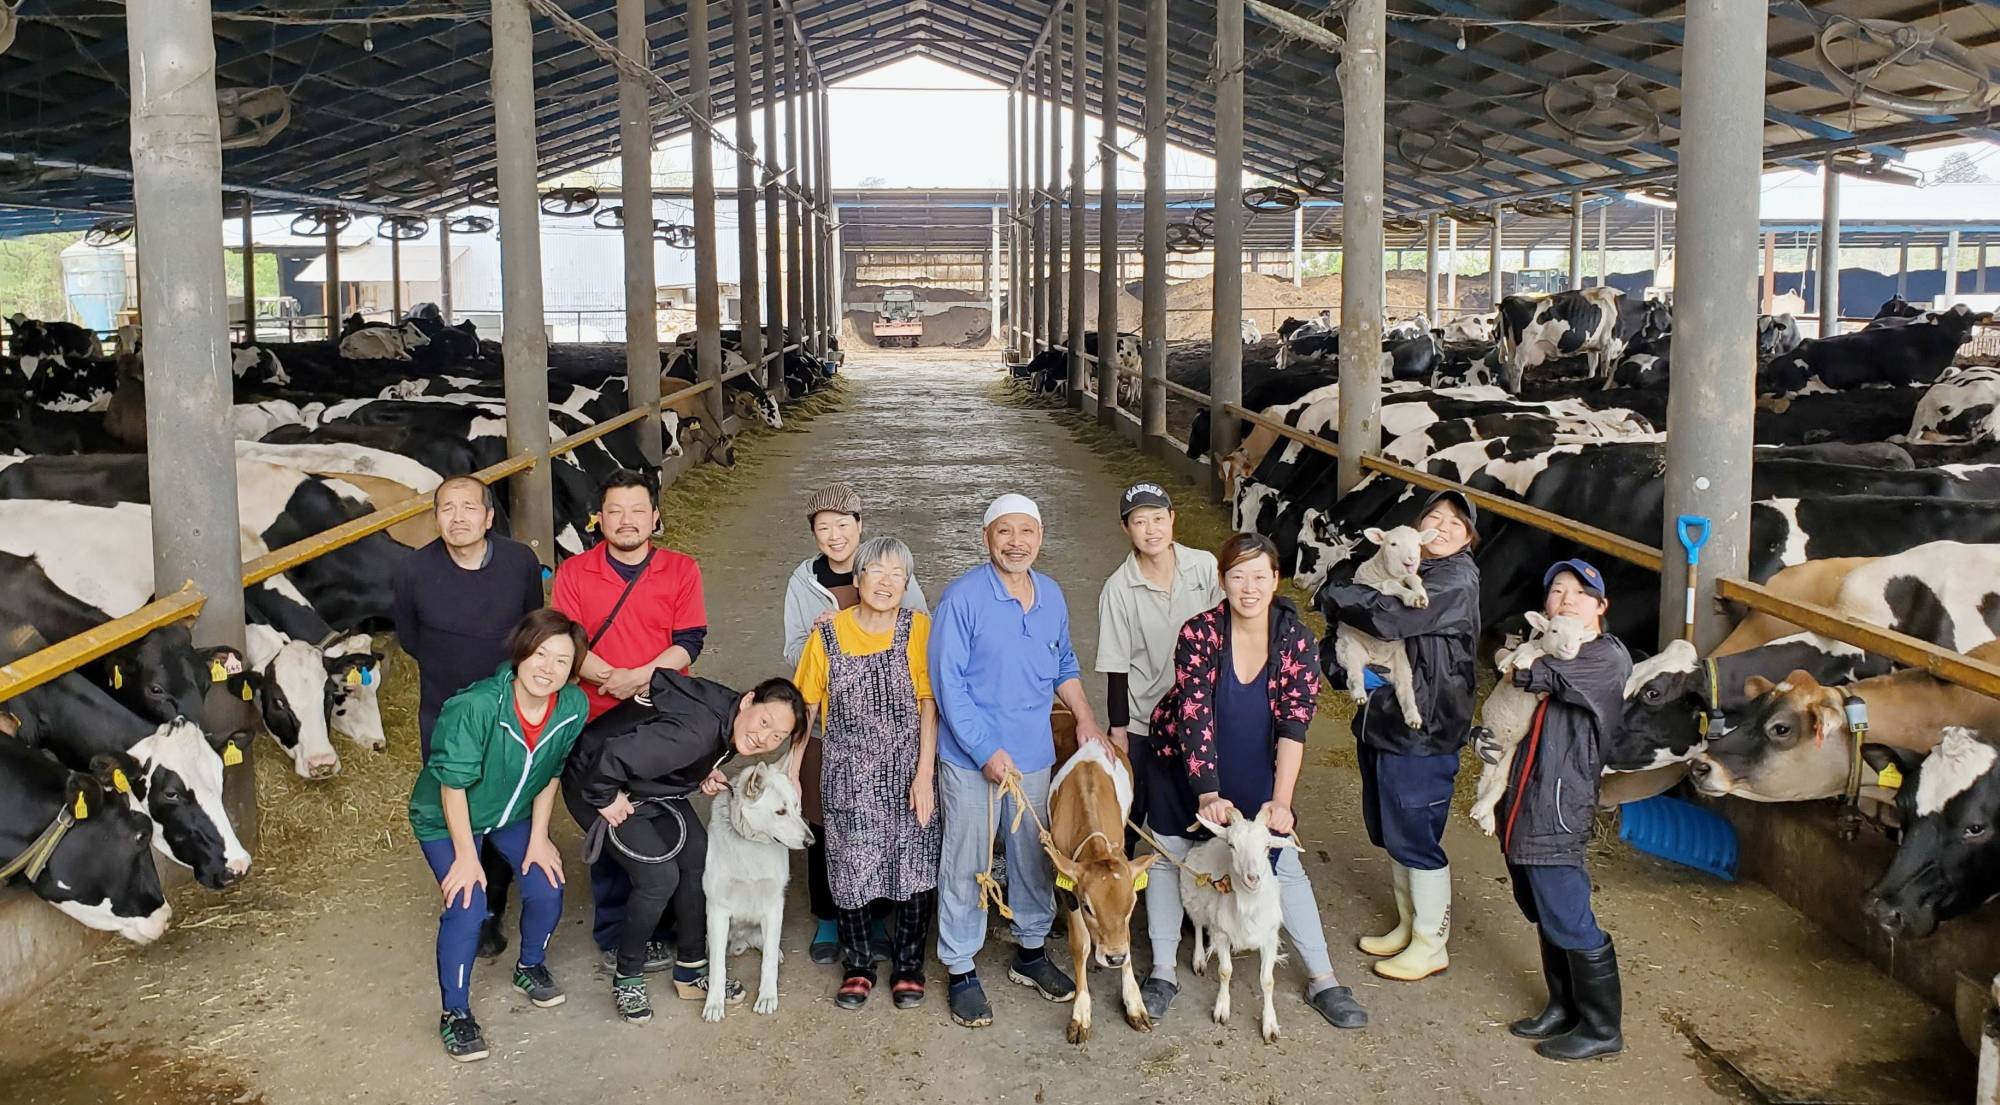 The staff of Yamada Farm in Koka, Shiga Prefecture, have been able to continue working thanks to the millions of yen received through crowdfunding. | KYODO